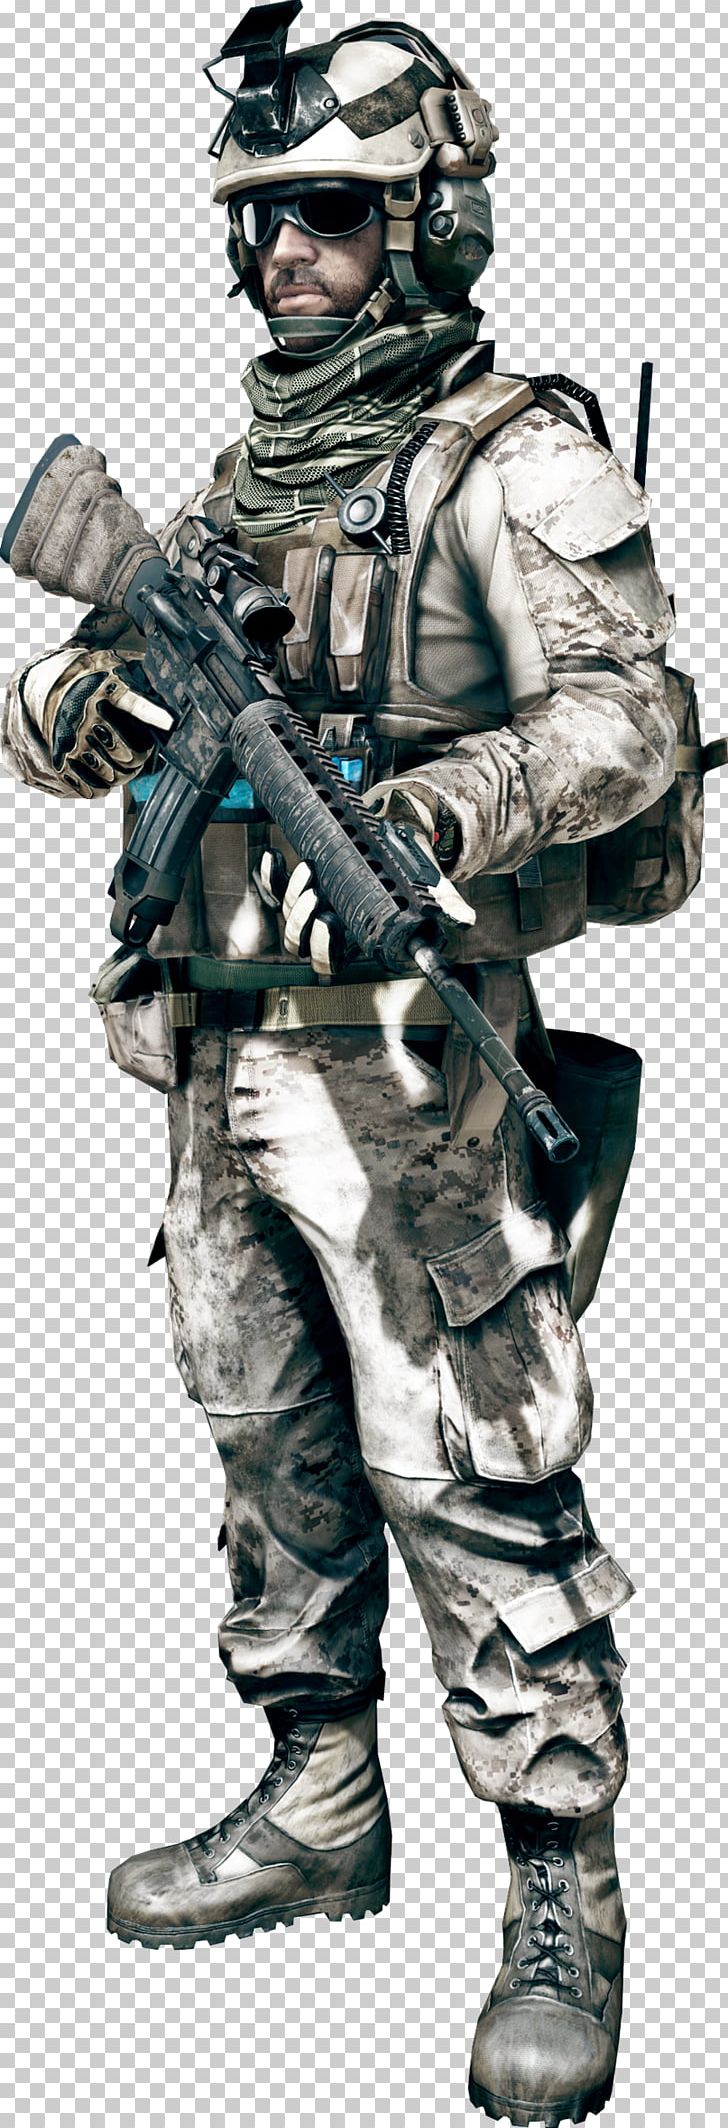 Battlefield 3 Battlefield 4 Battlefield 1 Battlefield 2 Battlefield: Bad Company 2 PNG, Clipart, Armour, Army, Assault Rifle, Bat, Battlefield Free PNG Download